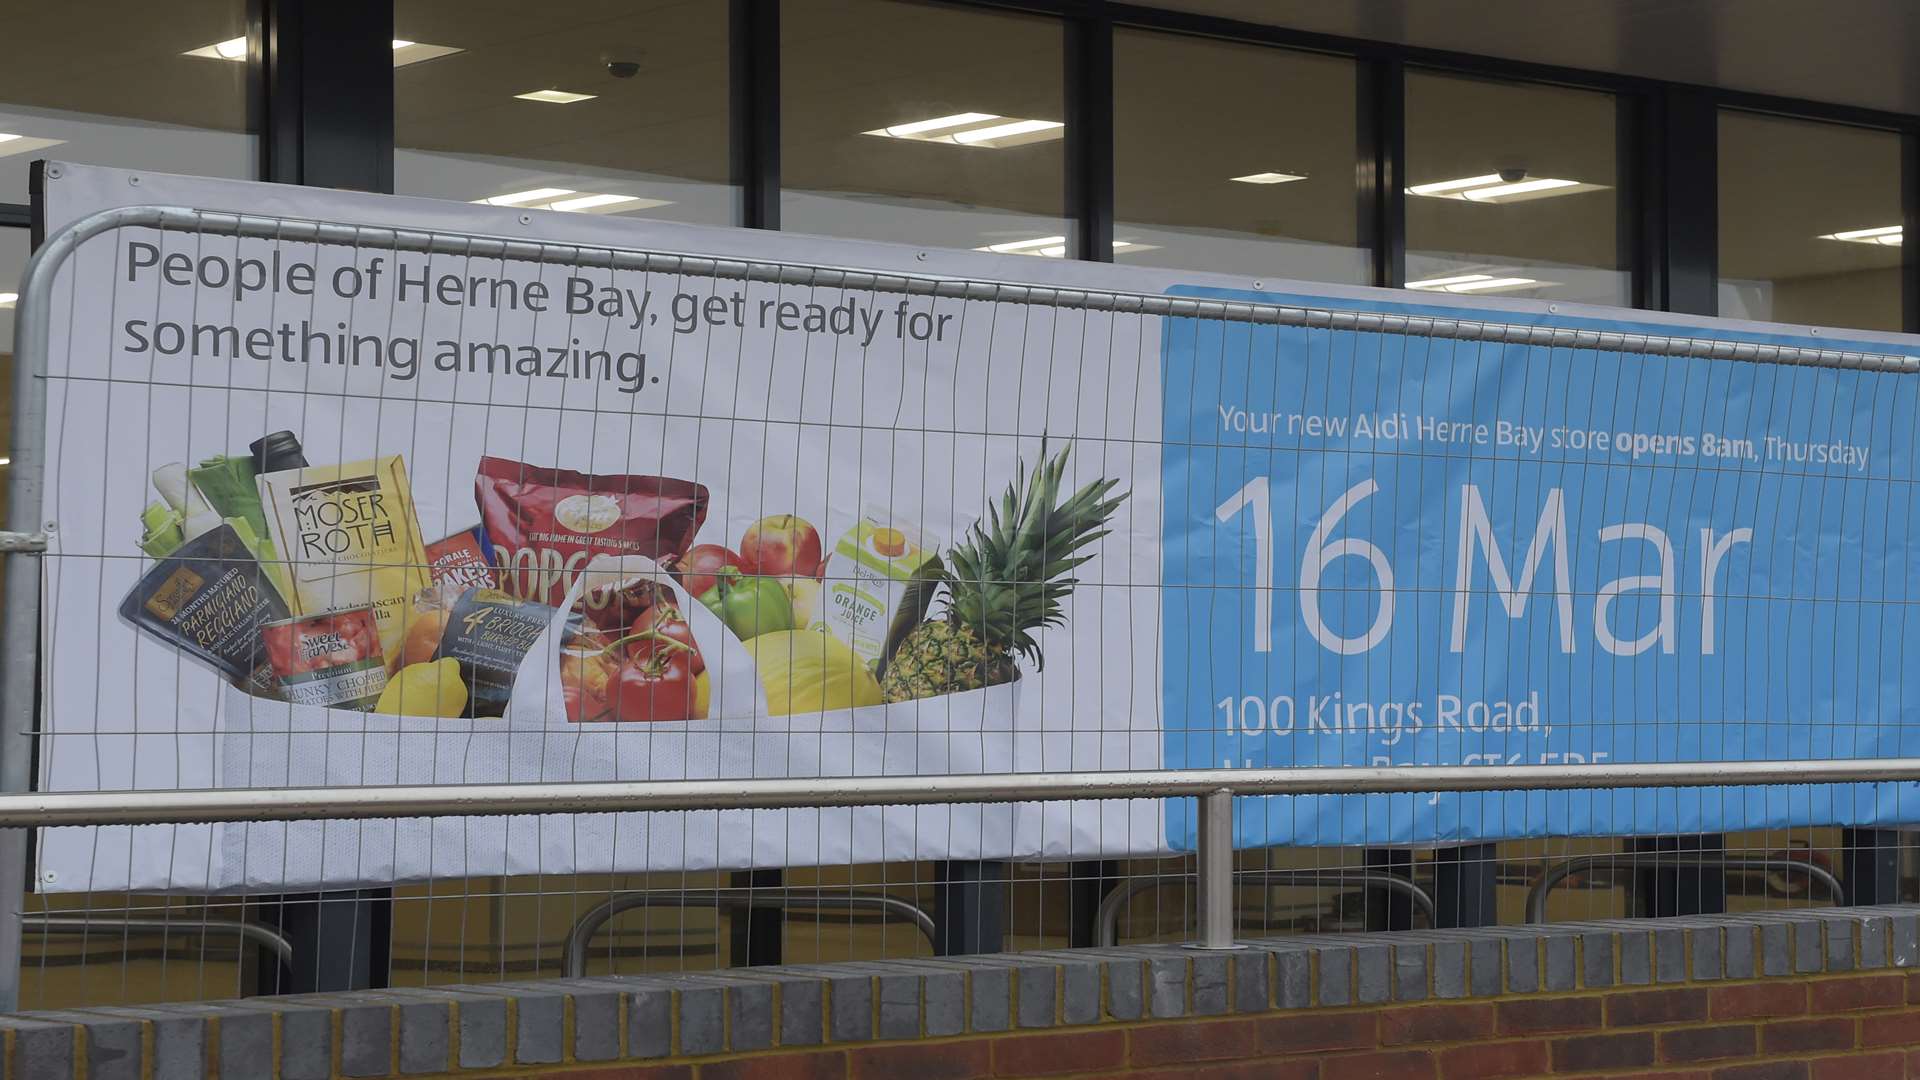 The new Aldi store opens today